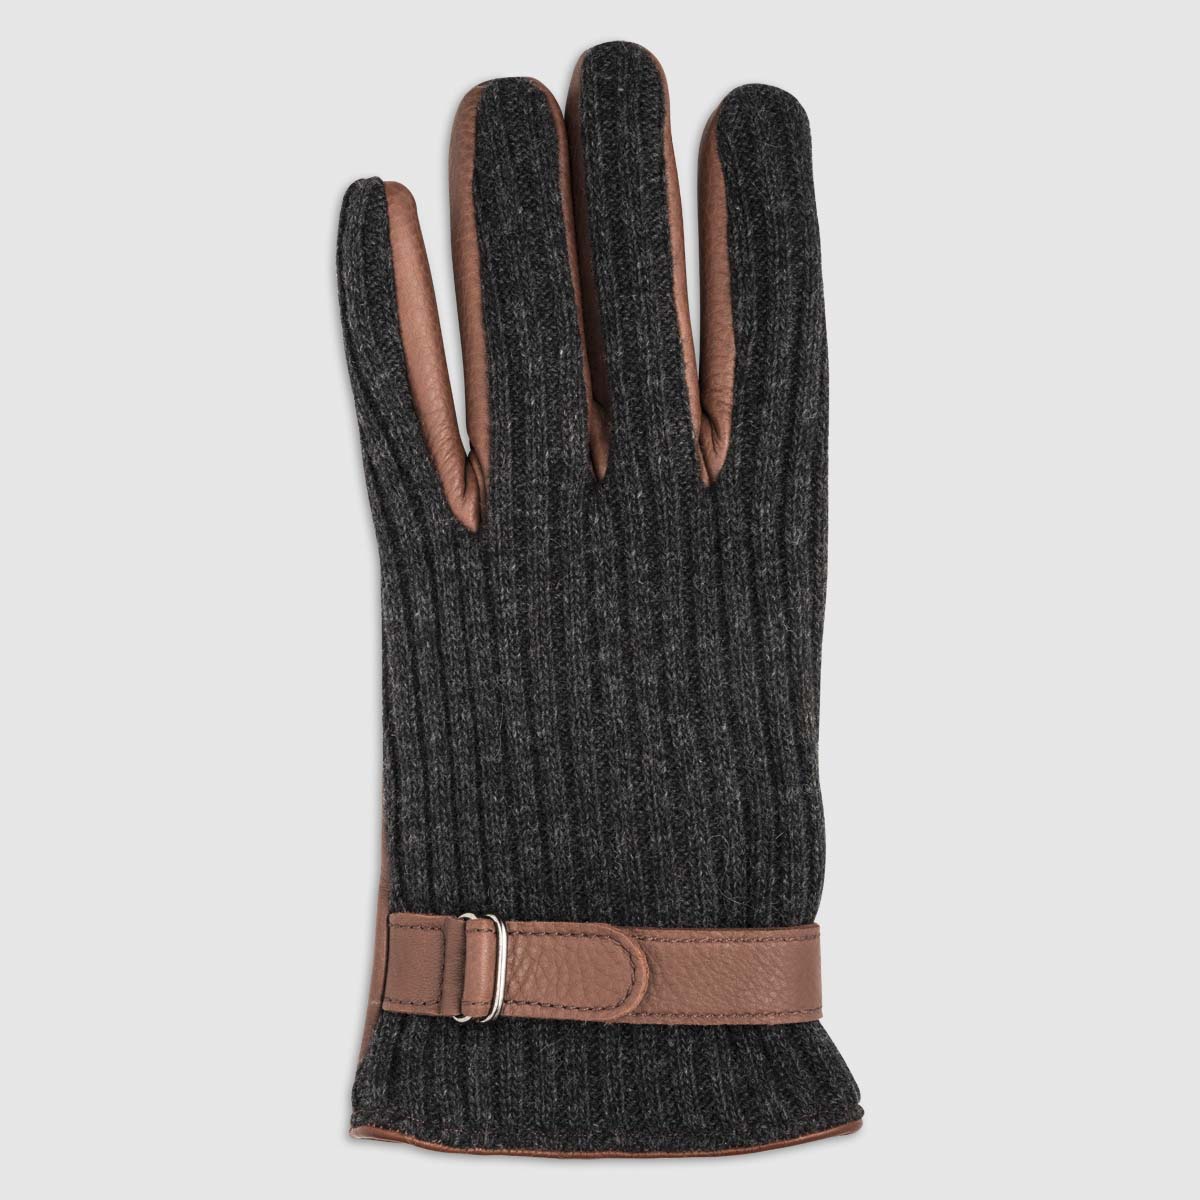 Wool Glove with Leather Palm and Cashmere Lining in Chestnut – 8.5